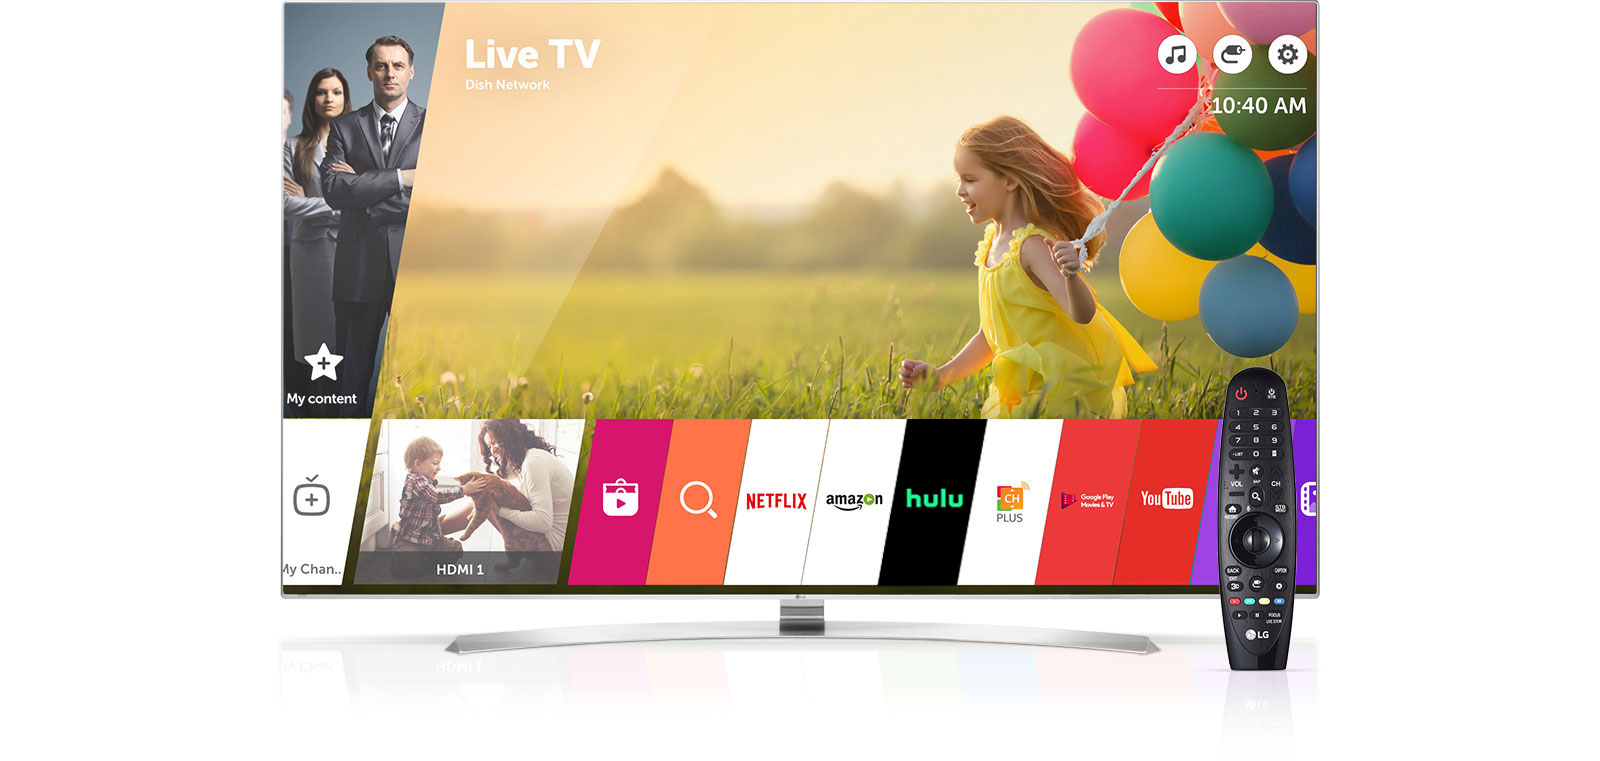 LG Smart TV w/ webOS: A World of Content | LG USA